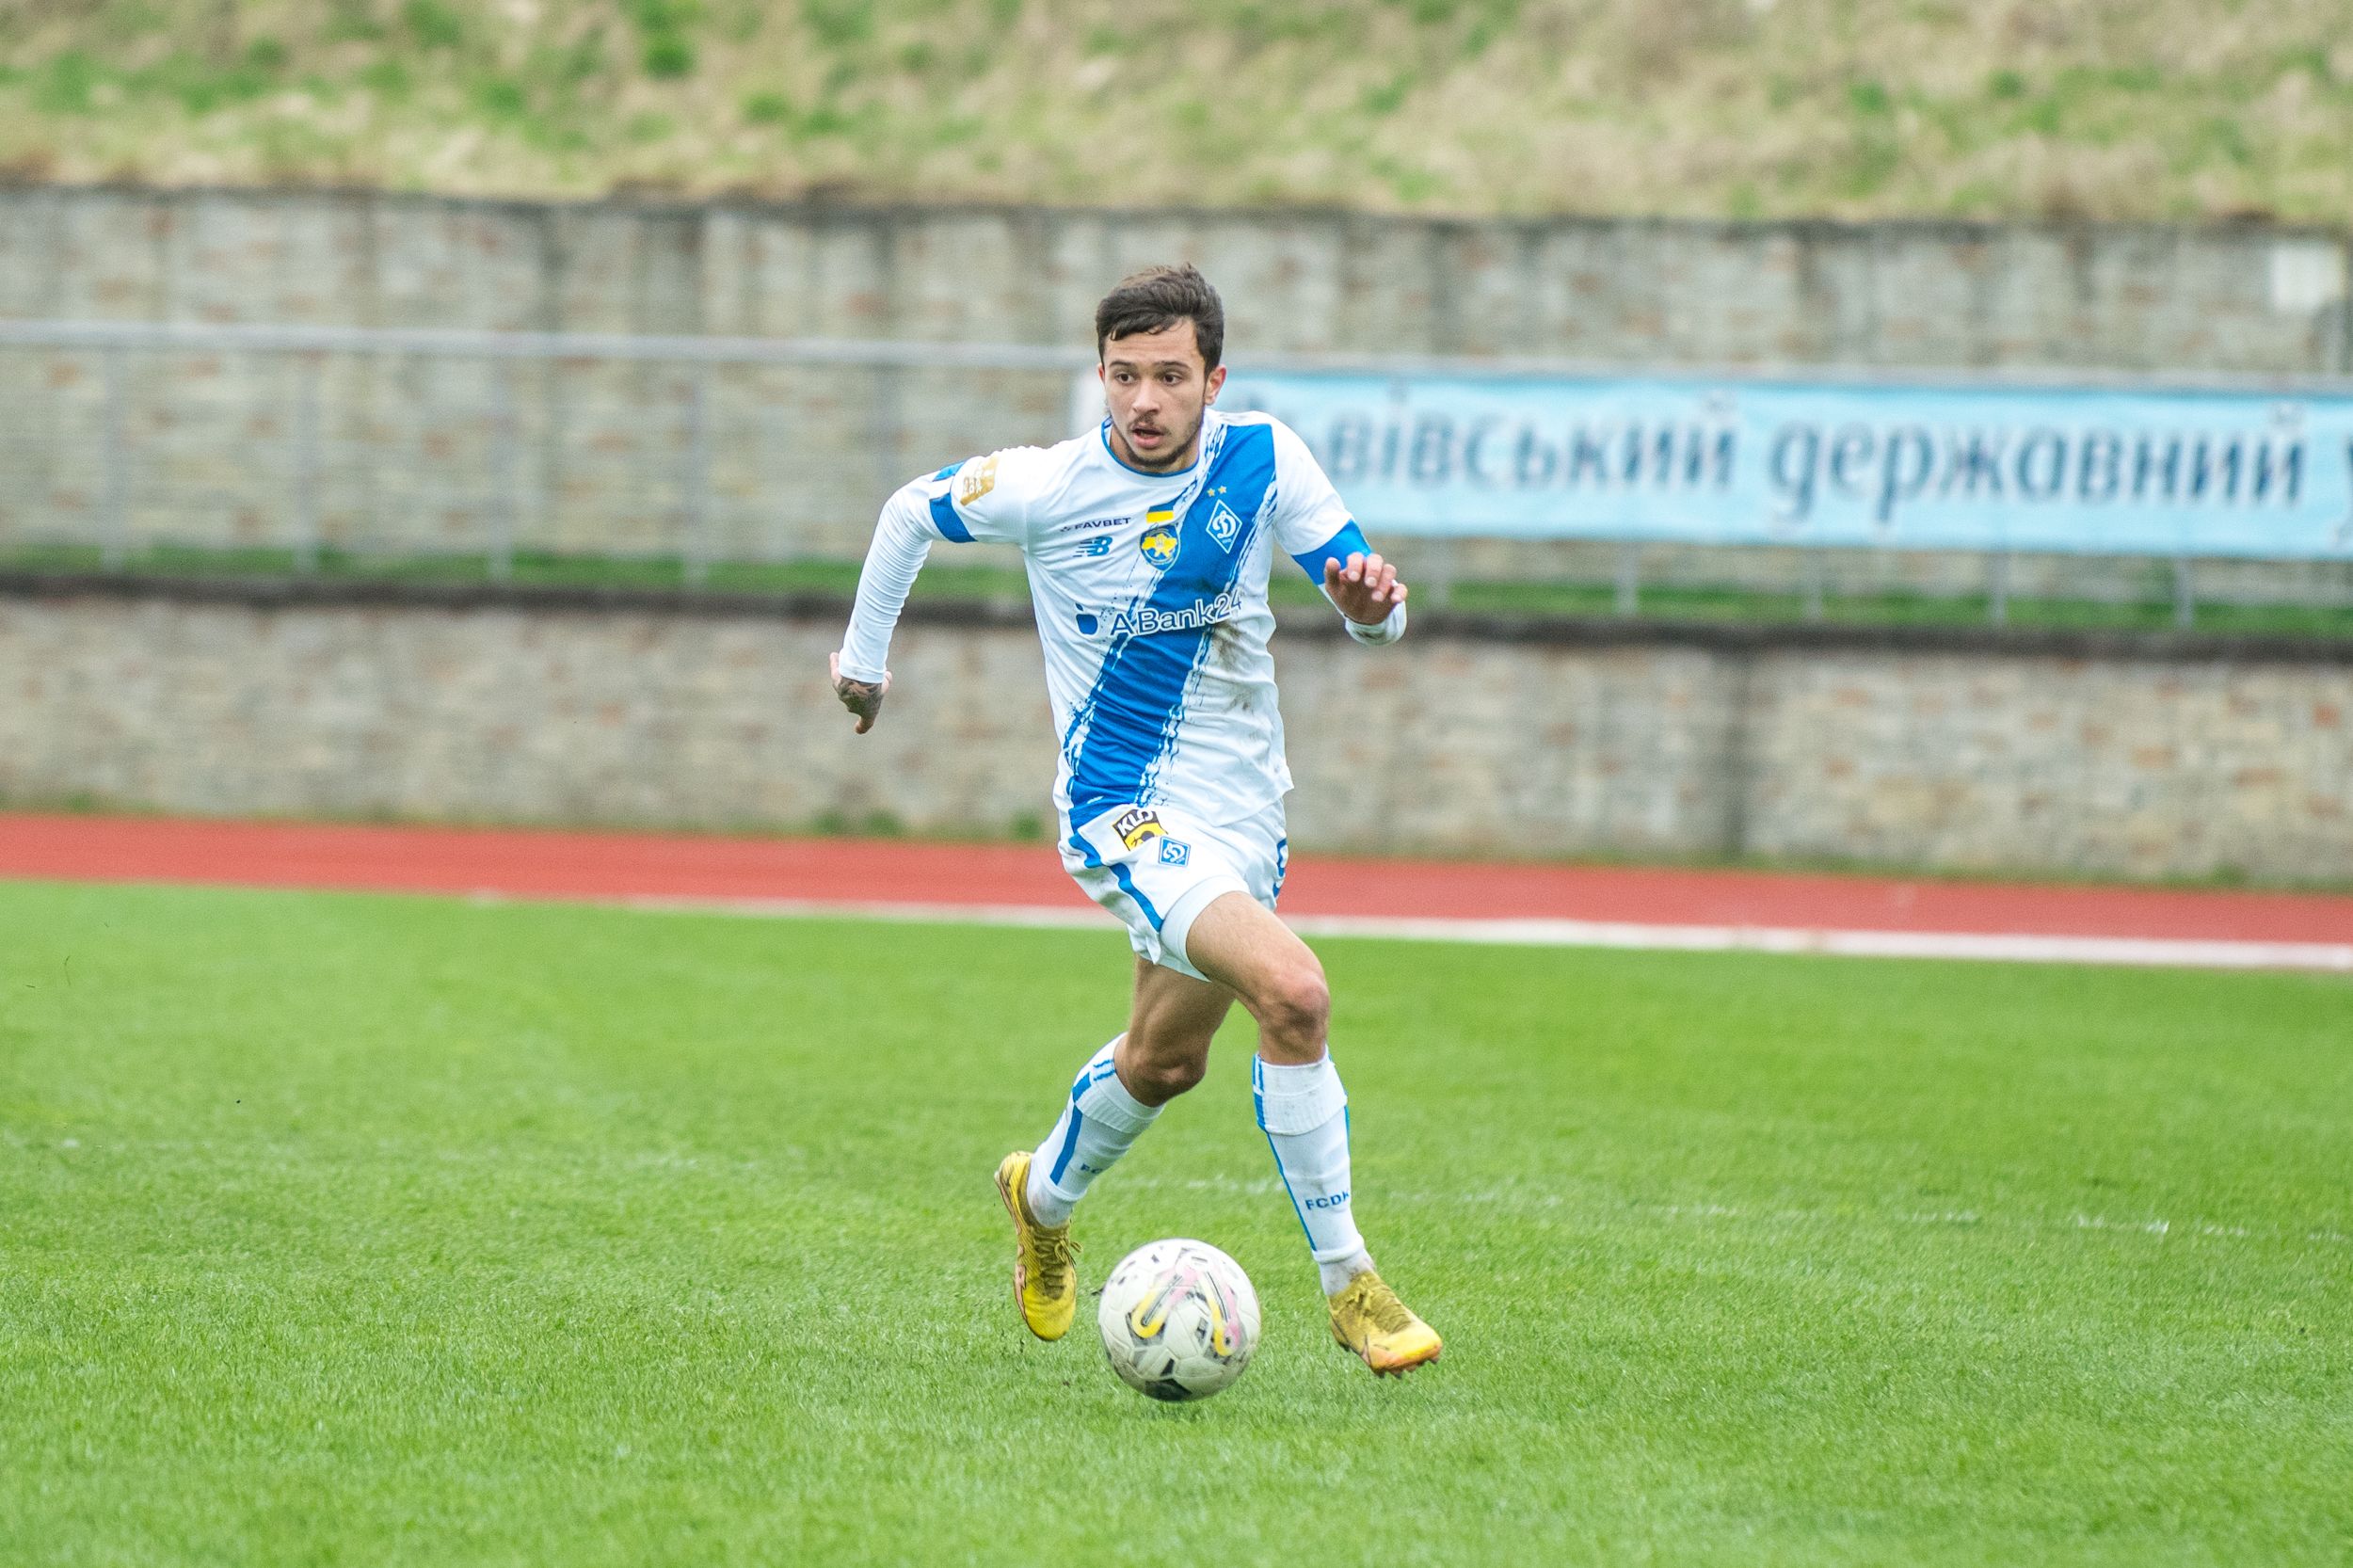 Nazar Voloshyn: “We must constantly win and gain more points”